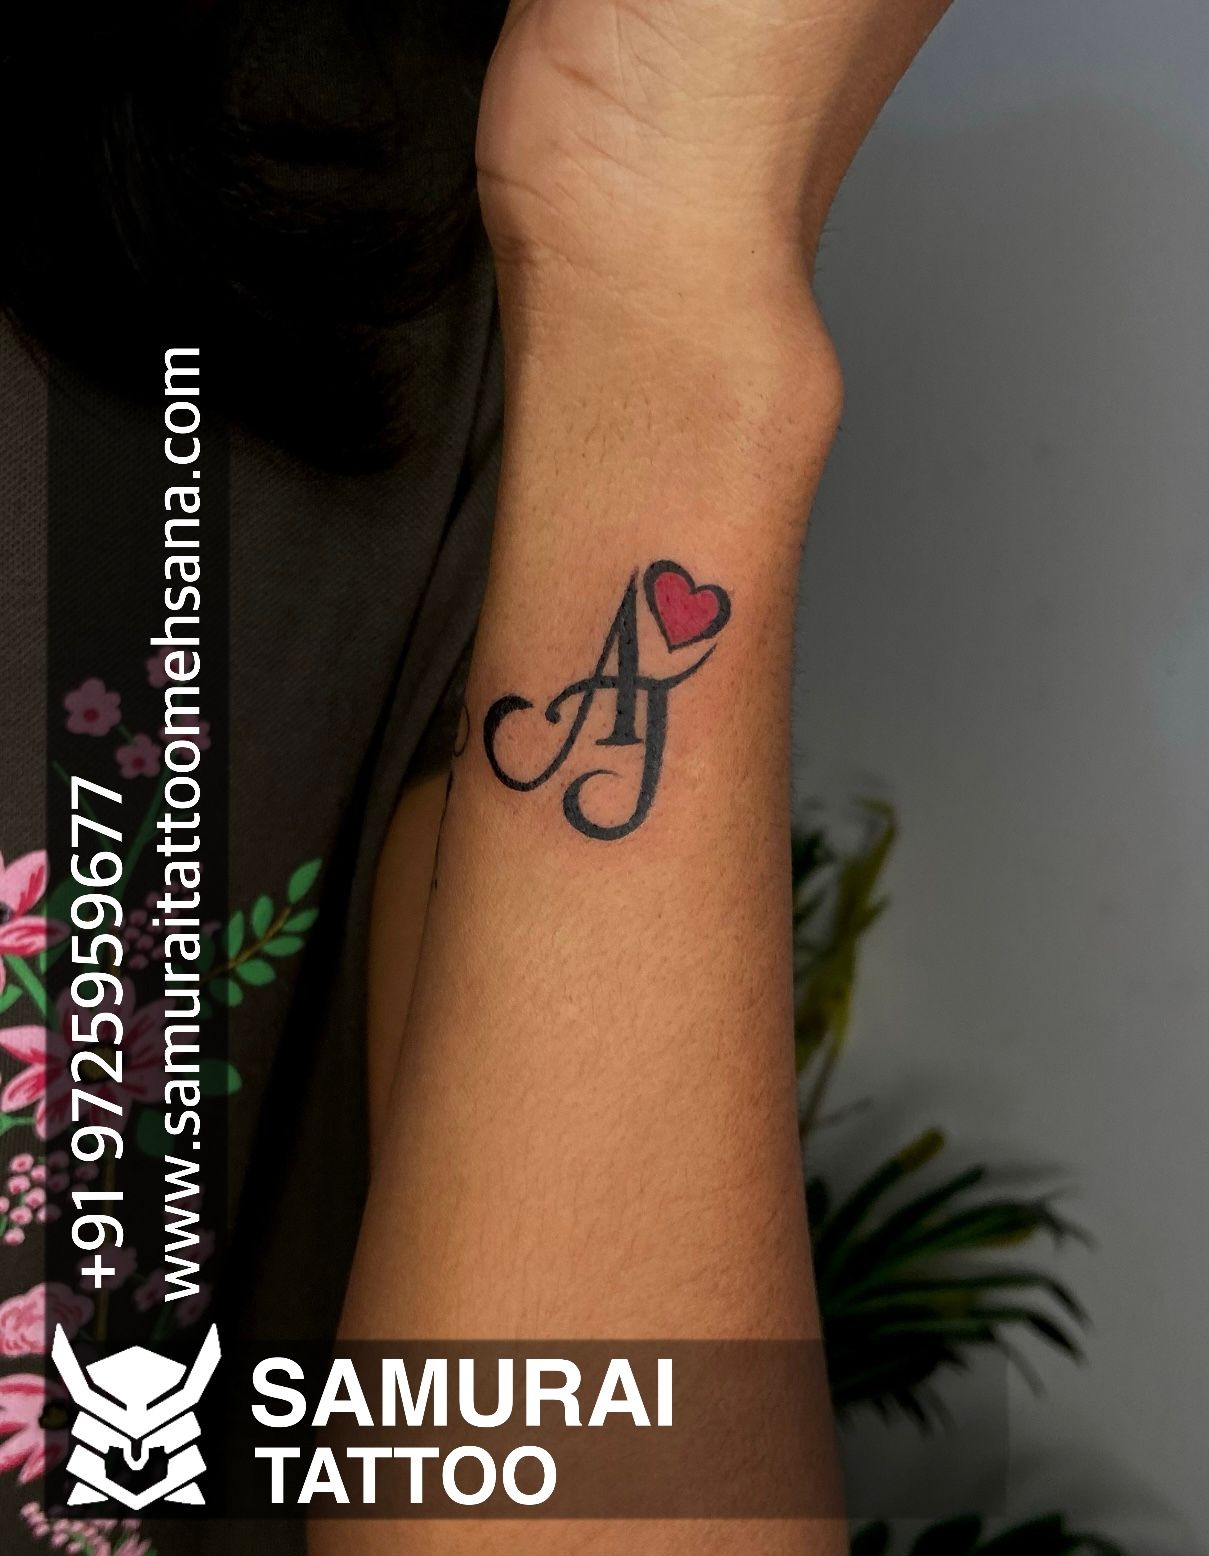 AJ small letter tattoo  making temporary tattoo by self  letter a and j  tattoo  YouTube